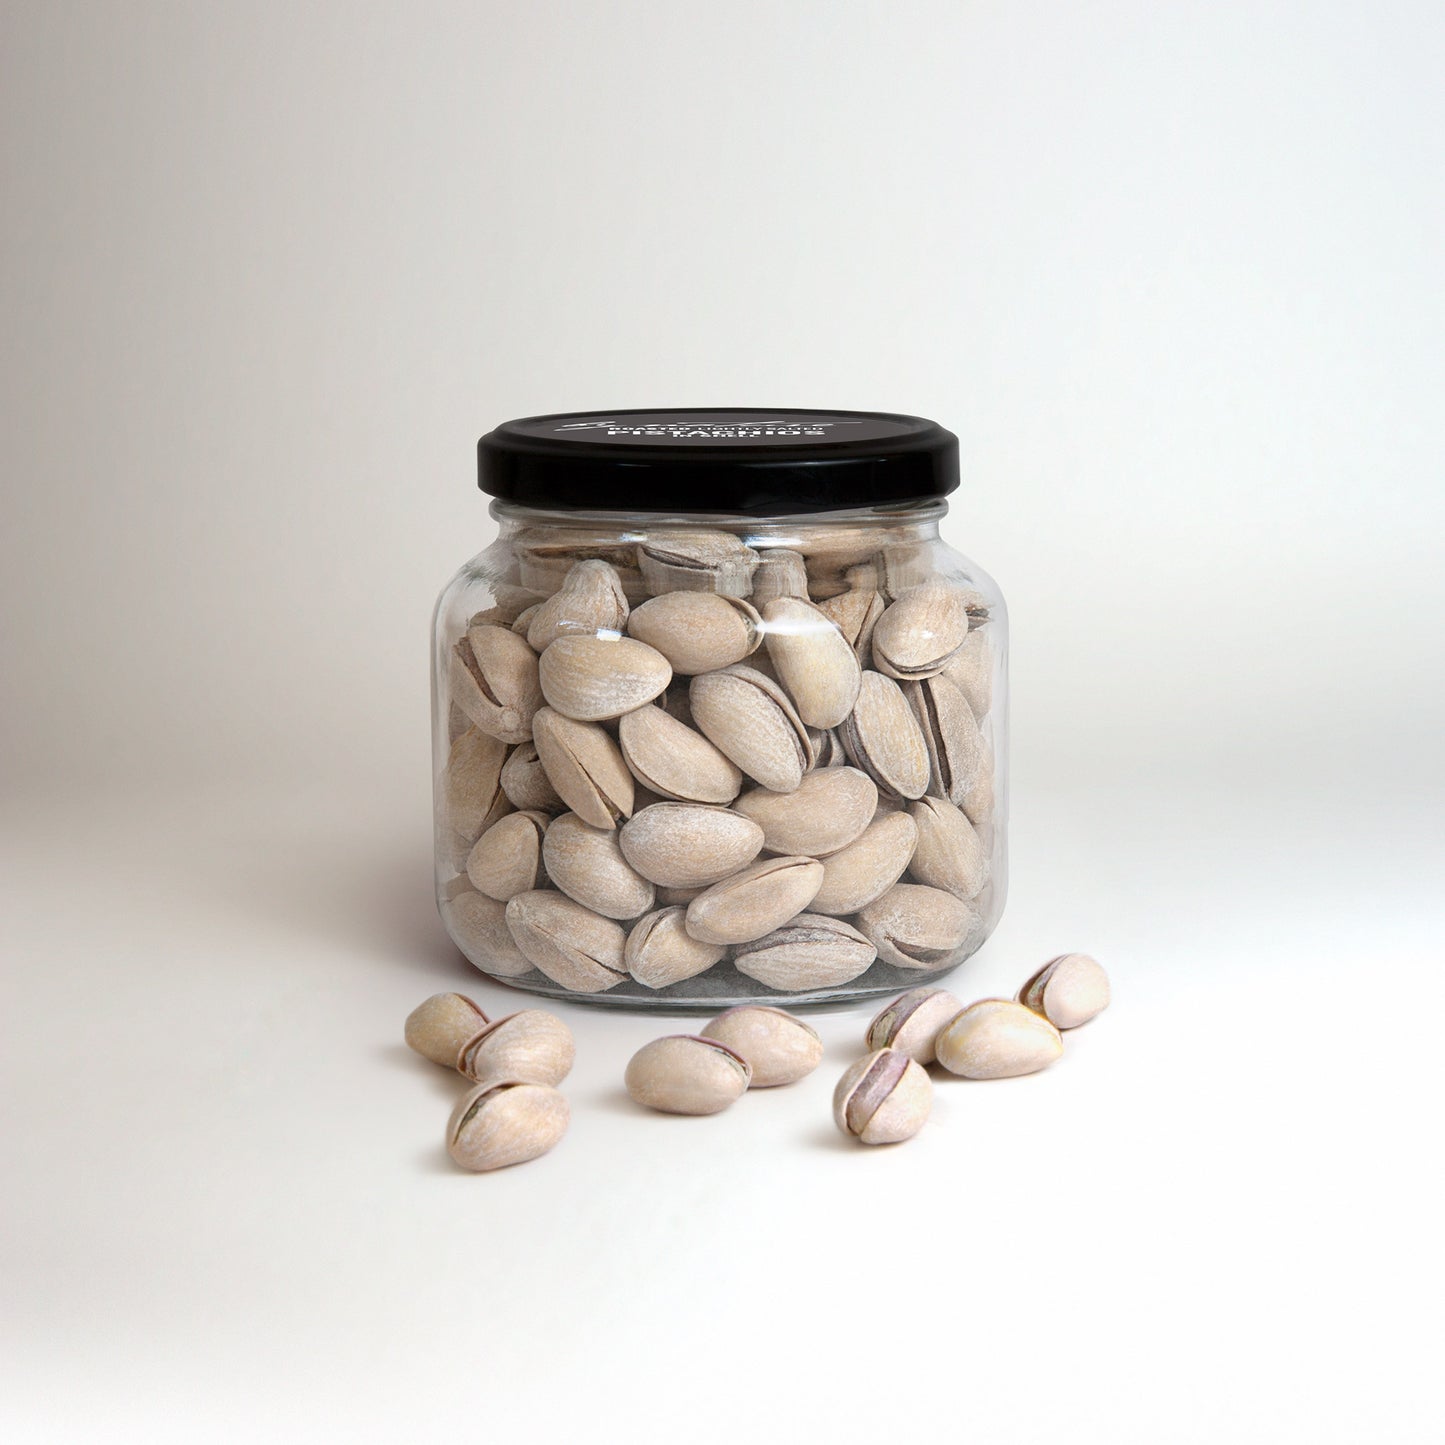 BY NATURE Pistachios in Shell - Roasted, Lightly Salted